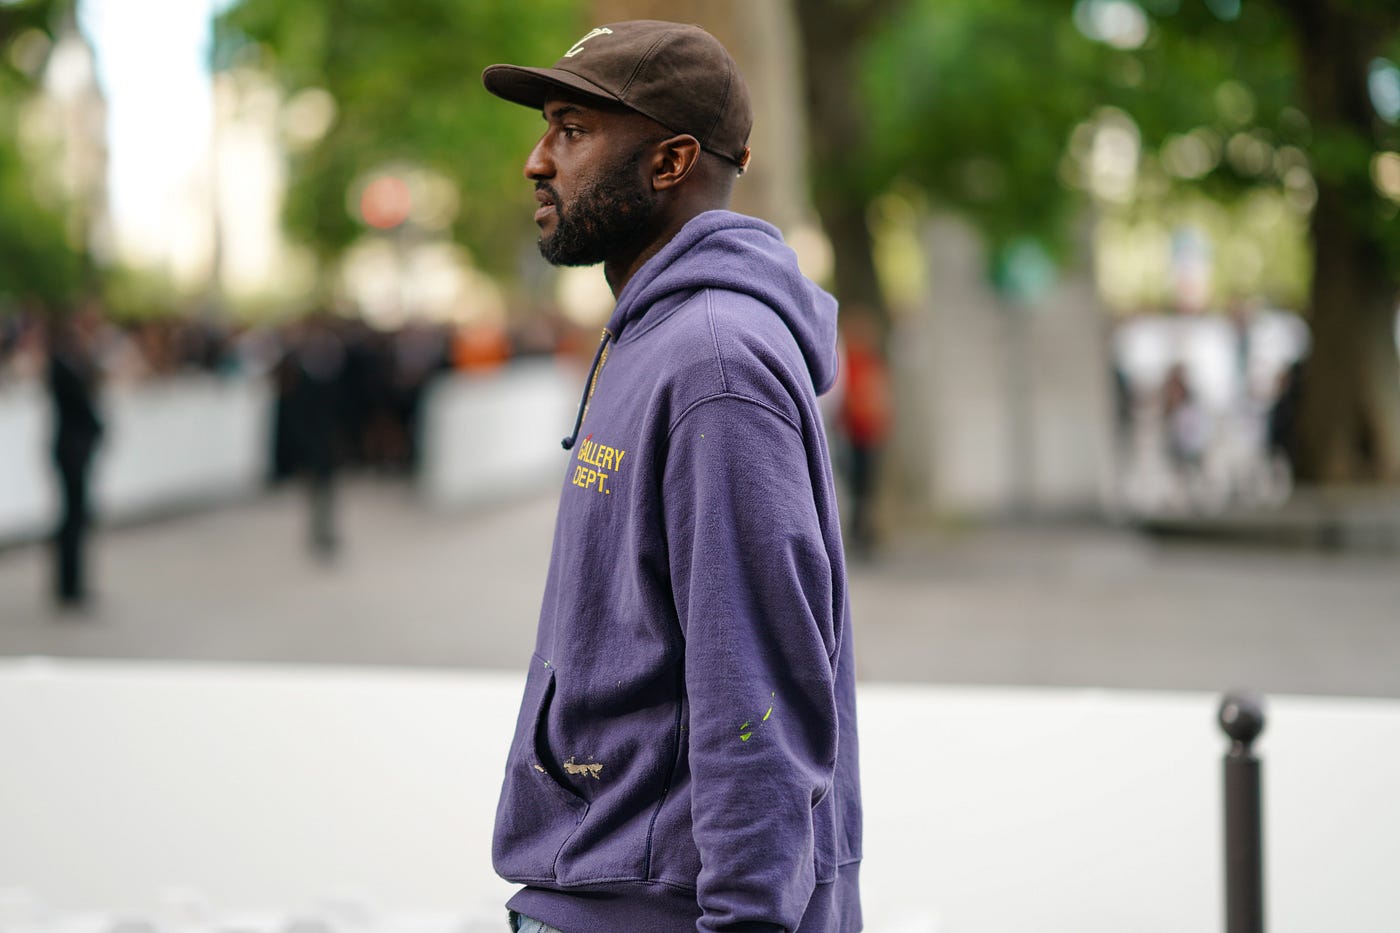 Inspired by the words of James Baldwin, Virgil Abloh envisions